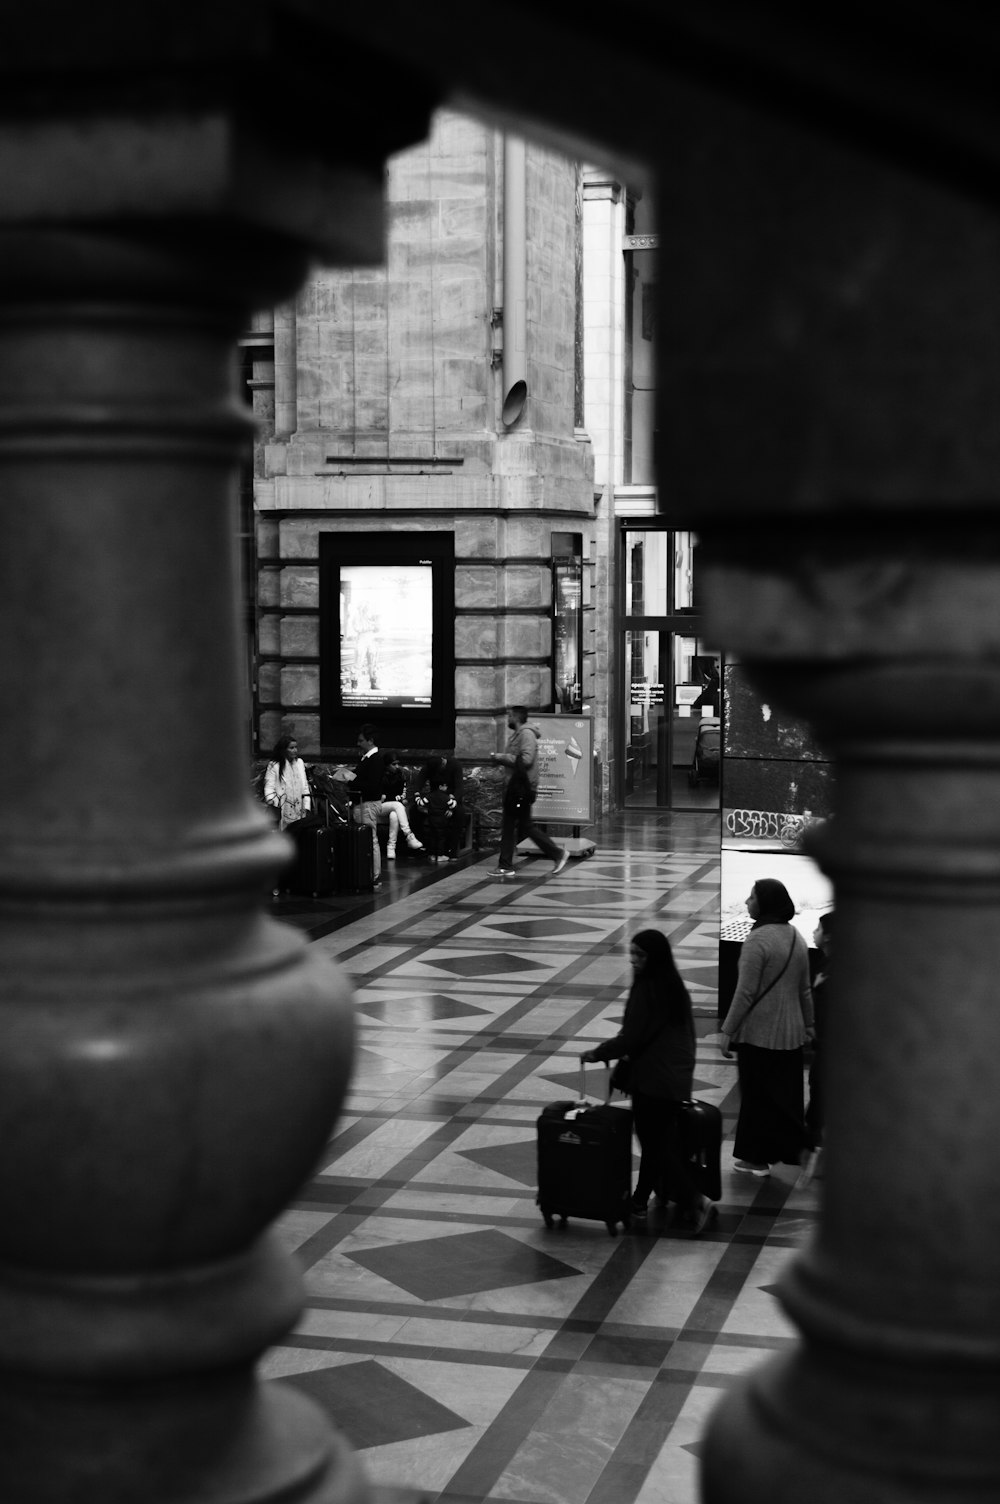 a black and white photo of people with luggage